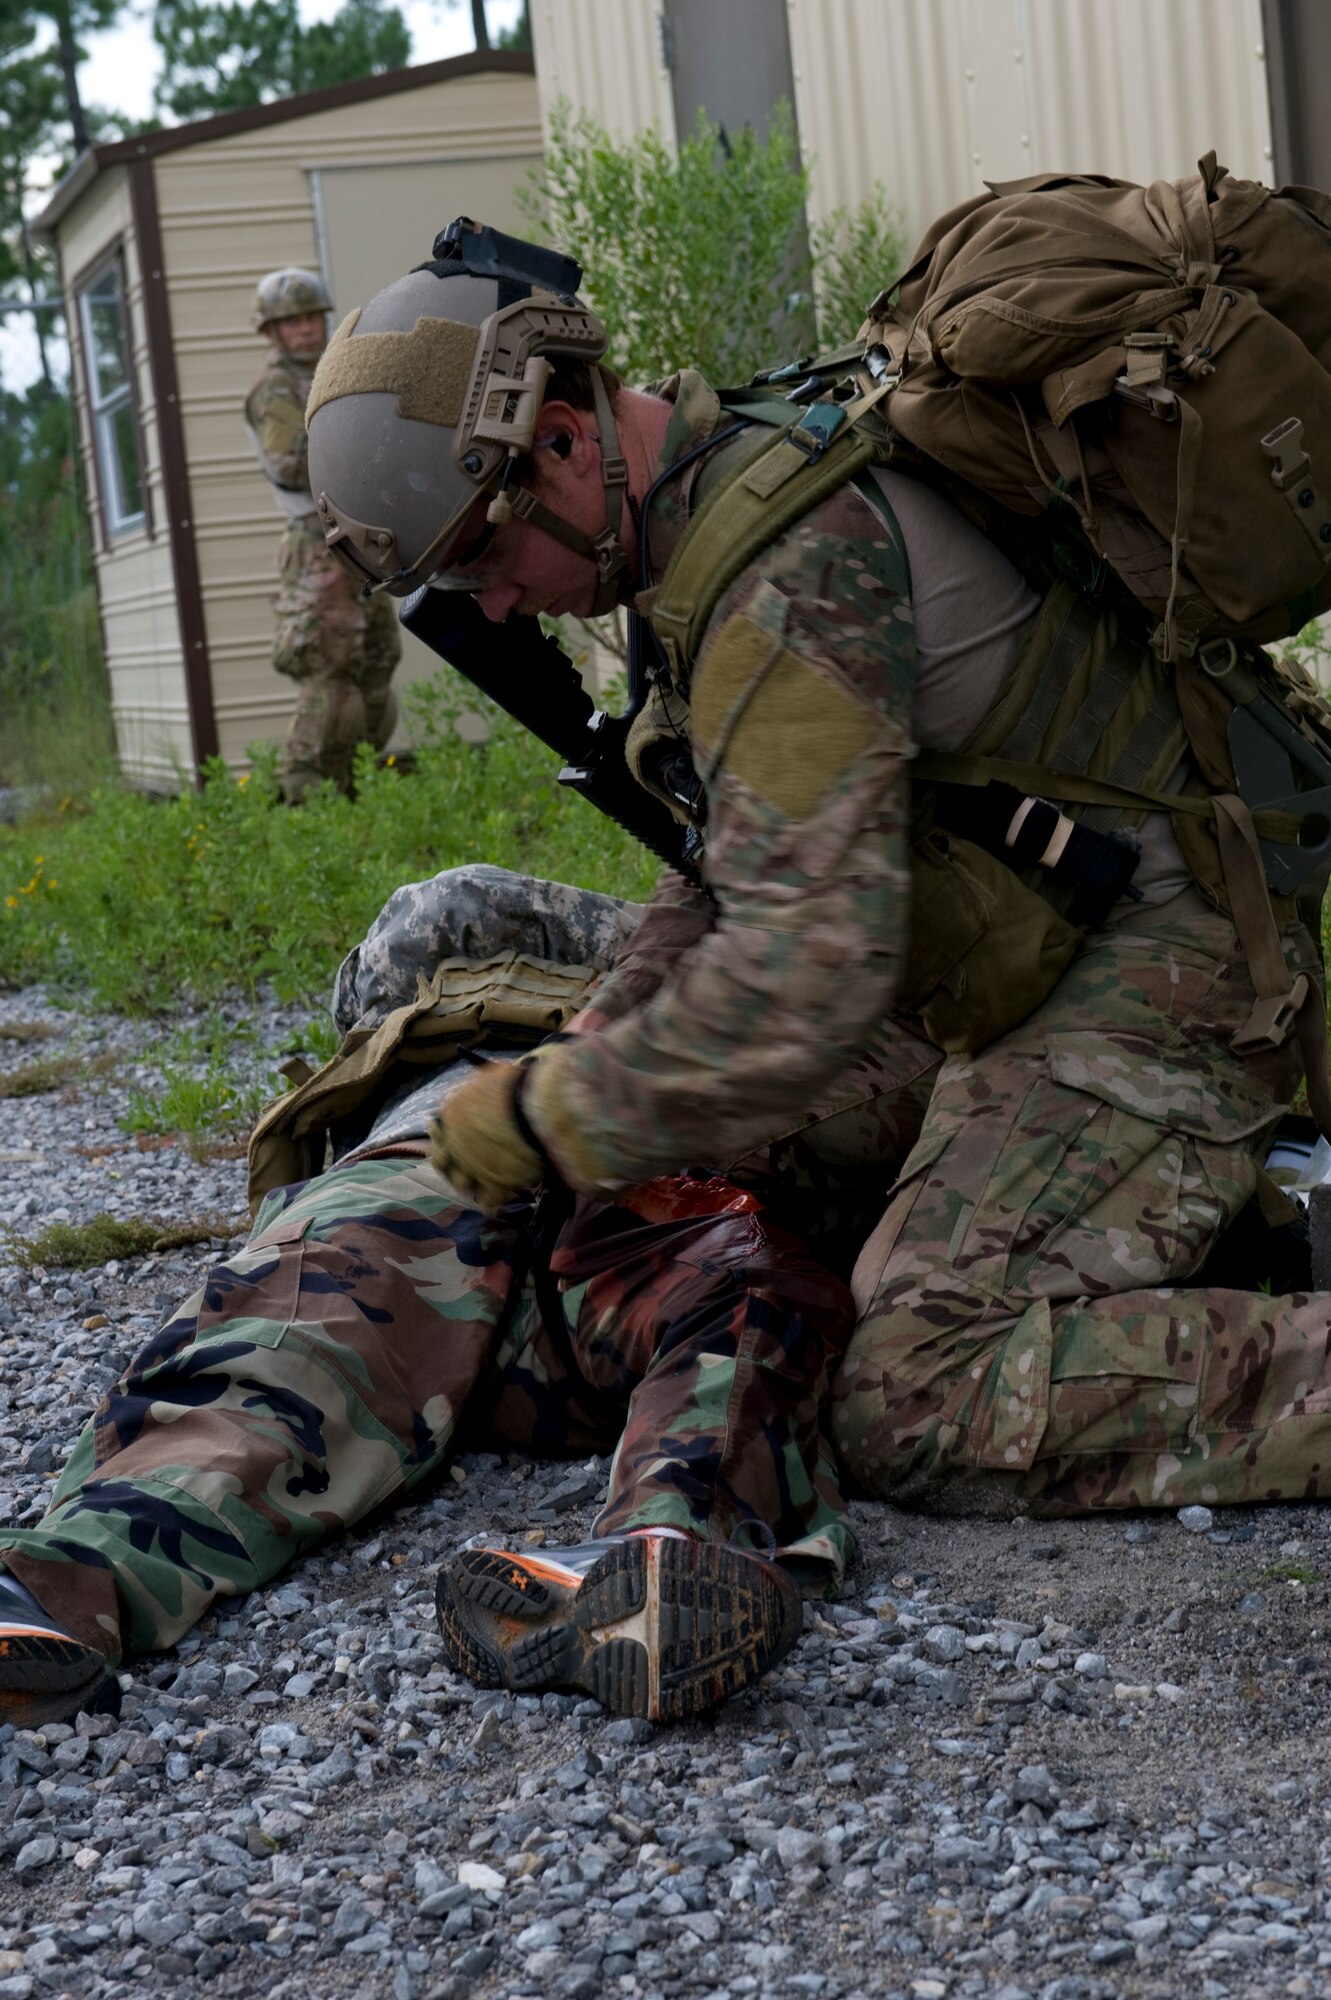 A U.S. Air Force pararescueman applies a tourniquet to a simulated improvised explosive device victim during a training exercise on Eglin Range, Fla., Aug. 21, 2012. The scenario played out included a simulated I.E.D. explosion in a building, as part of an upgrade training requirement for Air Force pararescuemen.(U.S. Air Force Photo/ Staff Sgt. John Bainter)